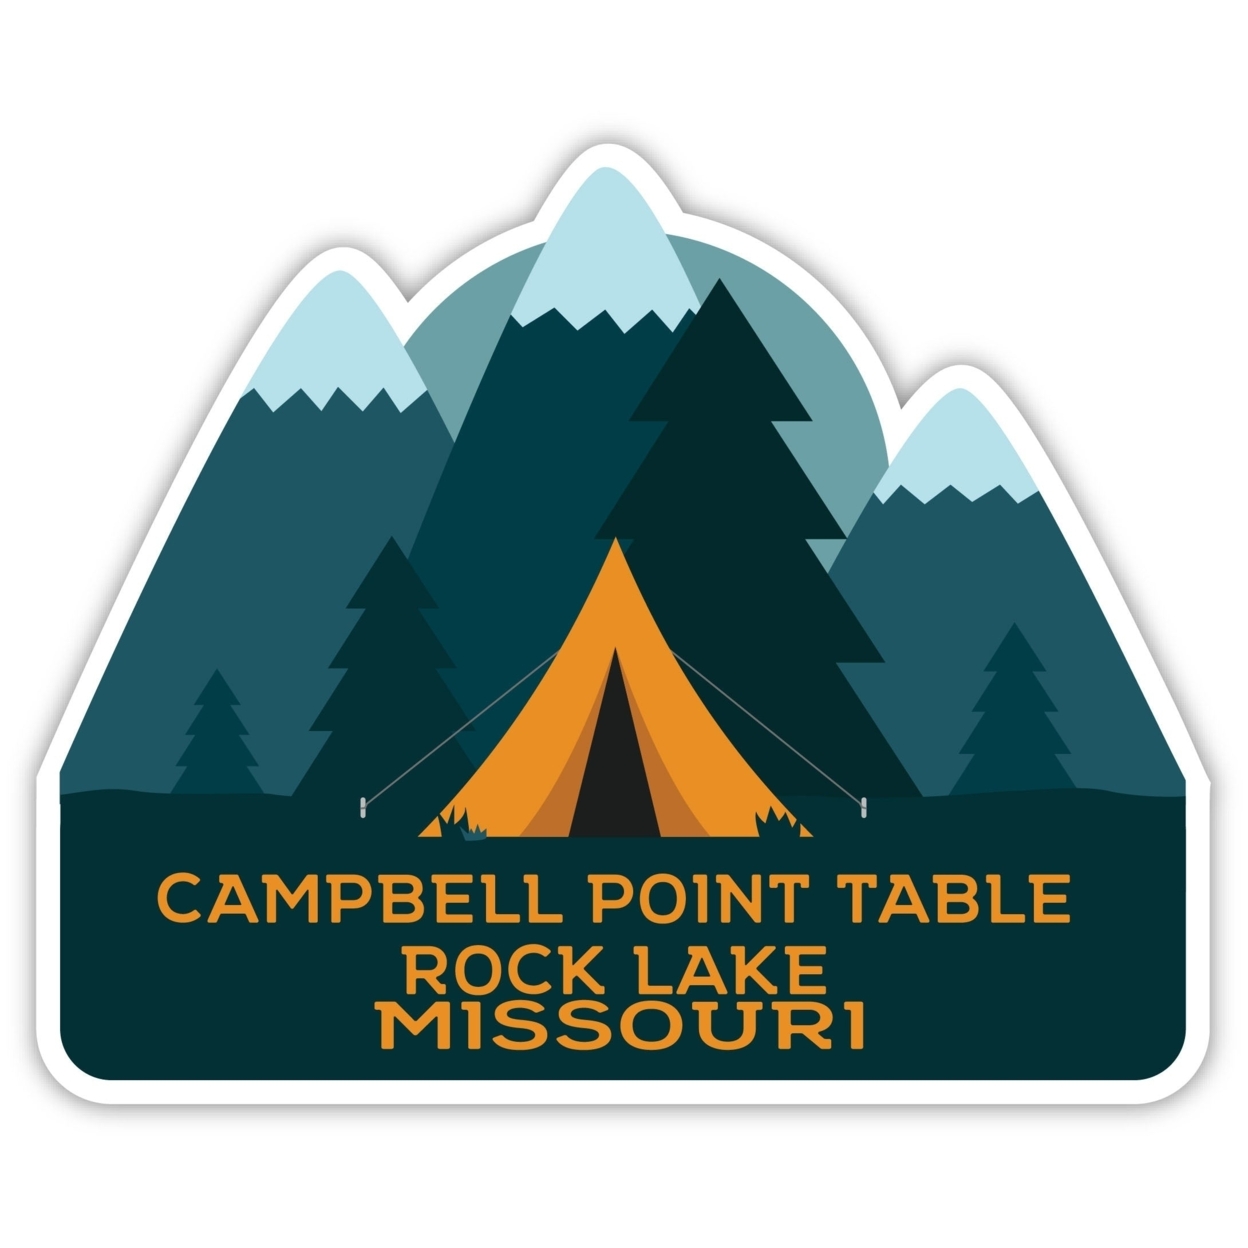 Campbell Point Table Rock Lake Missouri Souvenir Decorative Stickers (Choose Theme And Size) - 4-Pack, 6-Inch, Tent